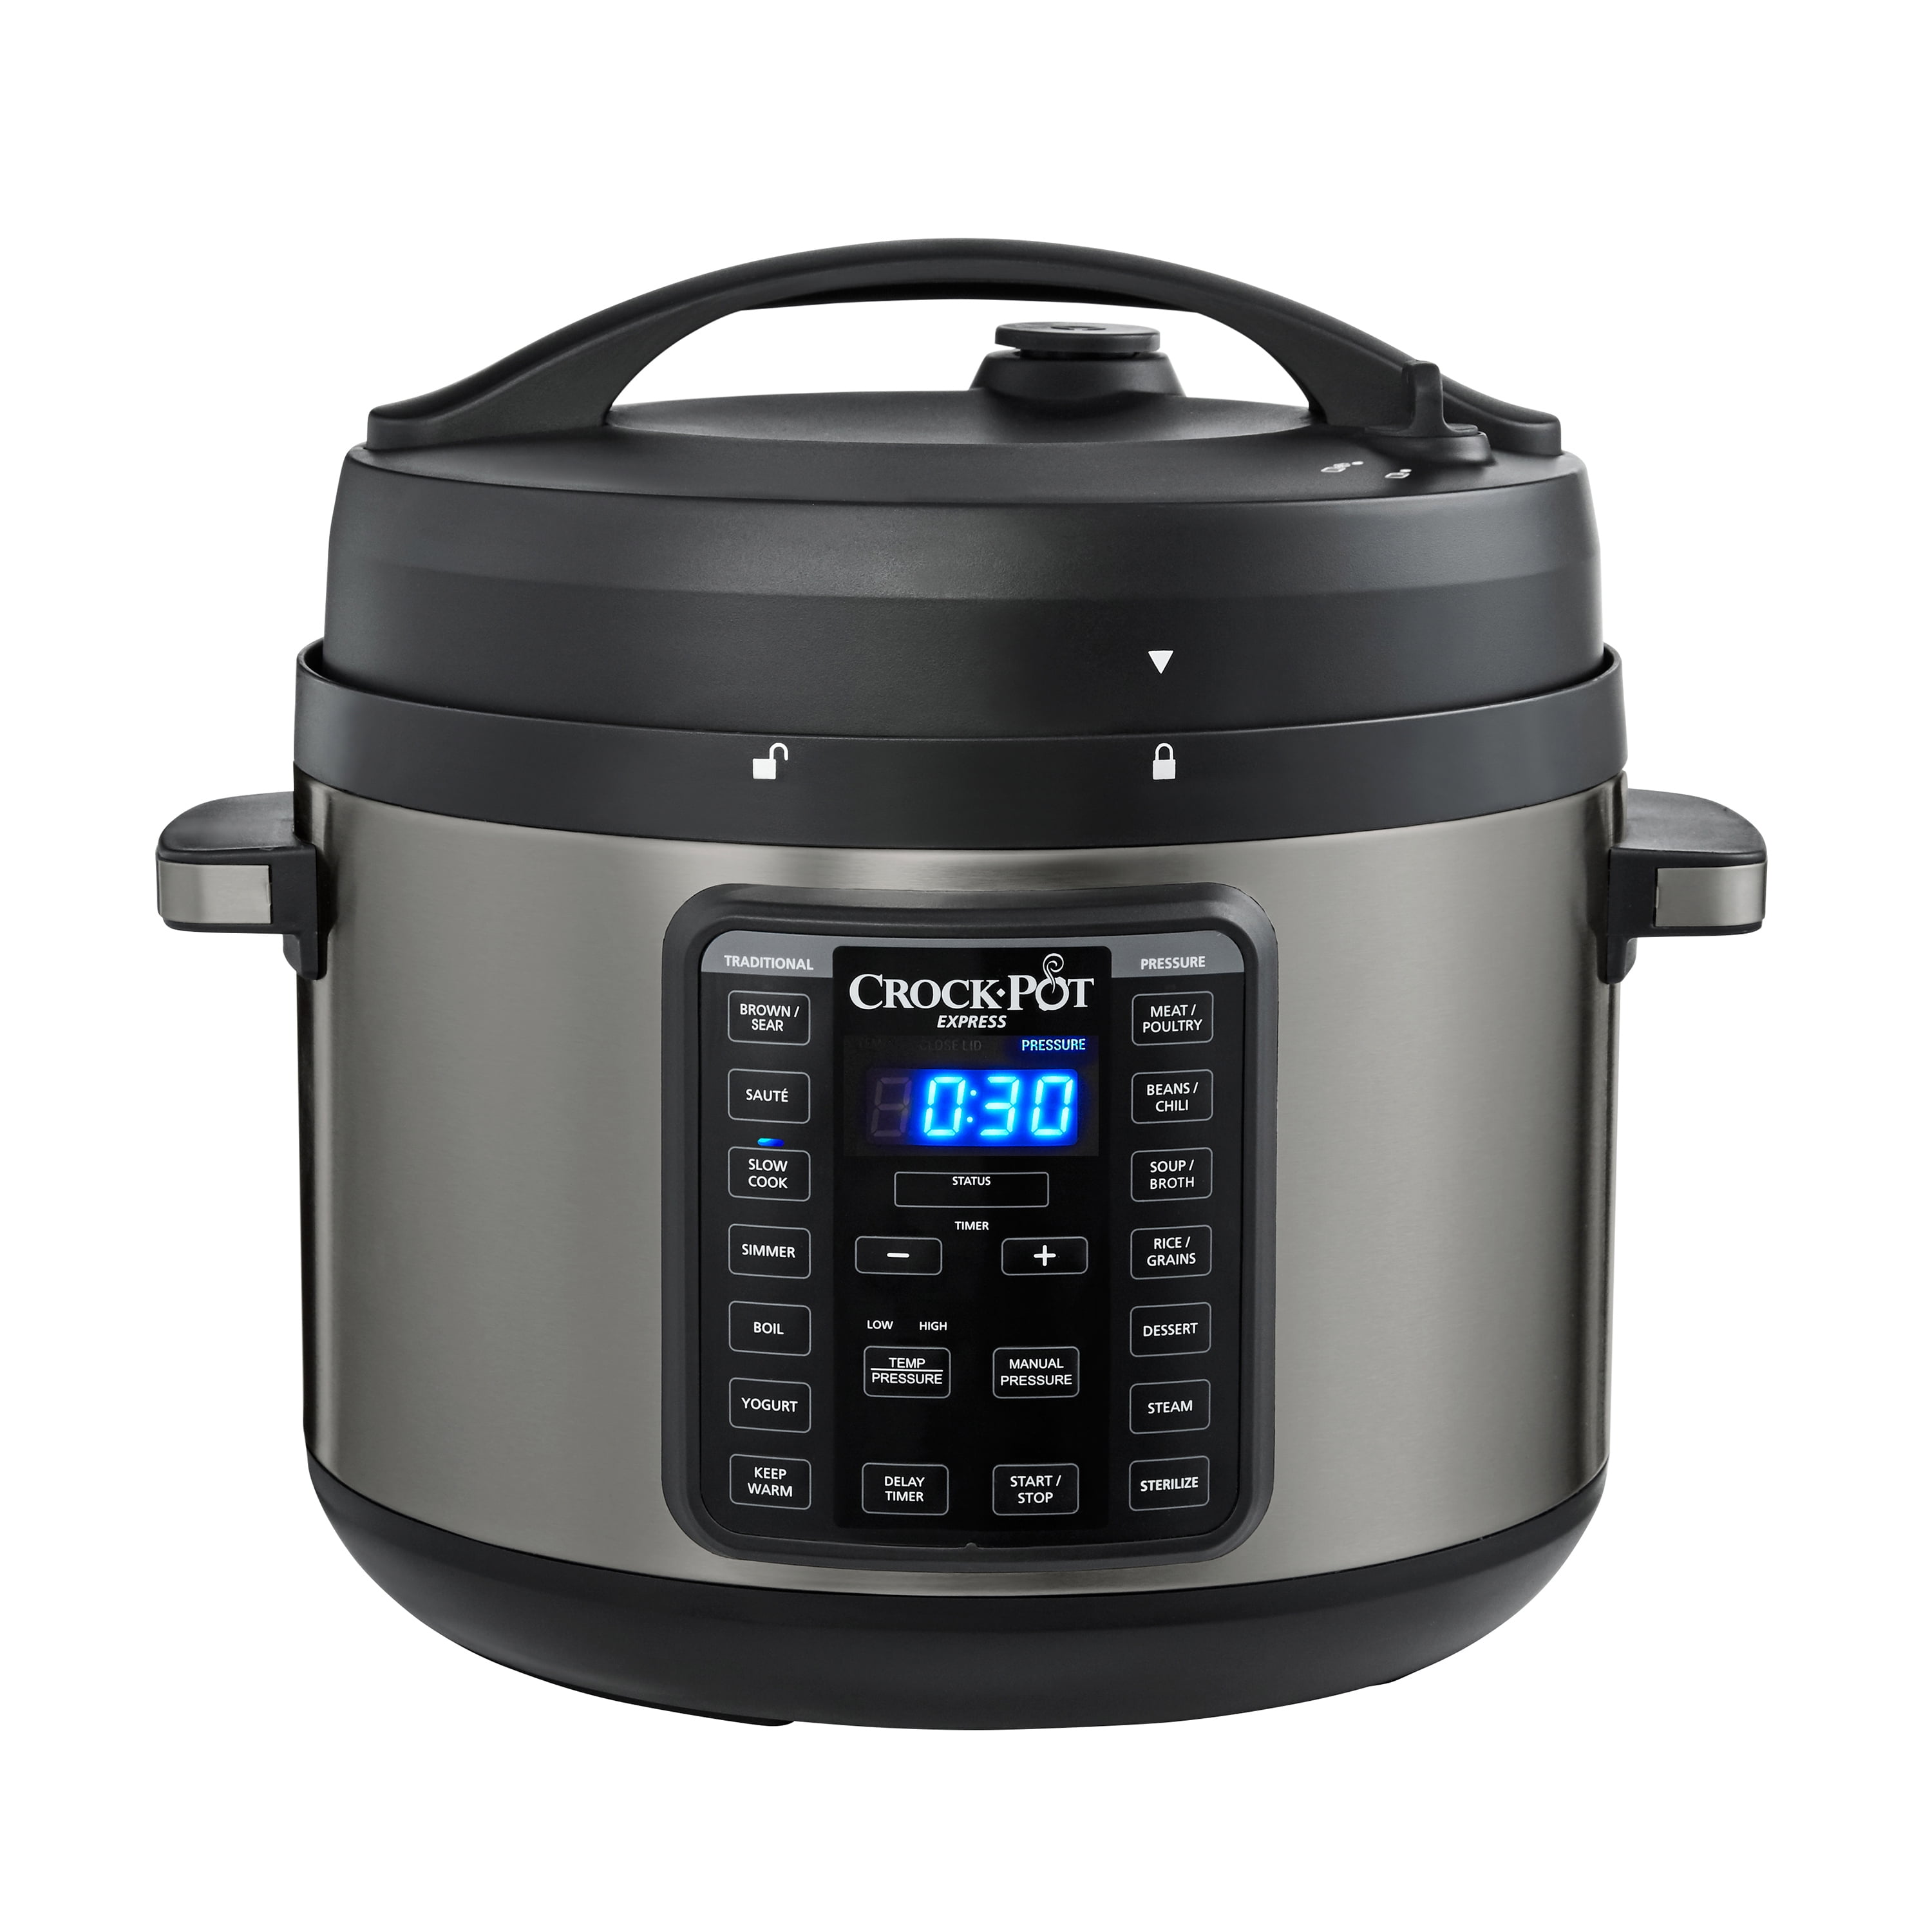 Rosewill RHPC-19001 6 Qt Electric Pressure Cooker 10-in-1 Multicooker, Slow  Cook 840951130254